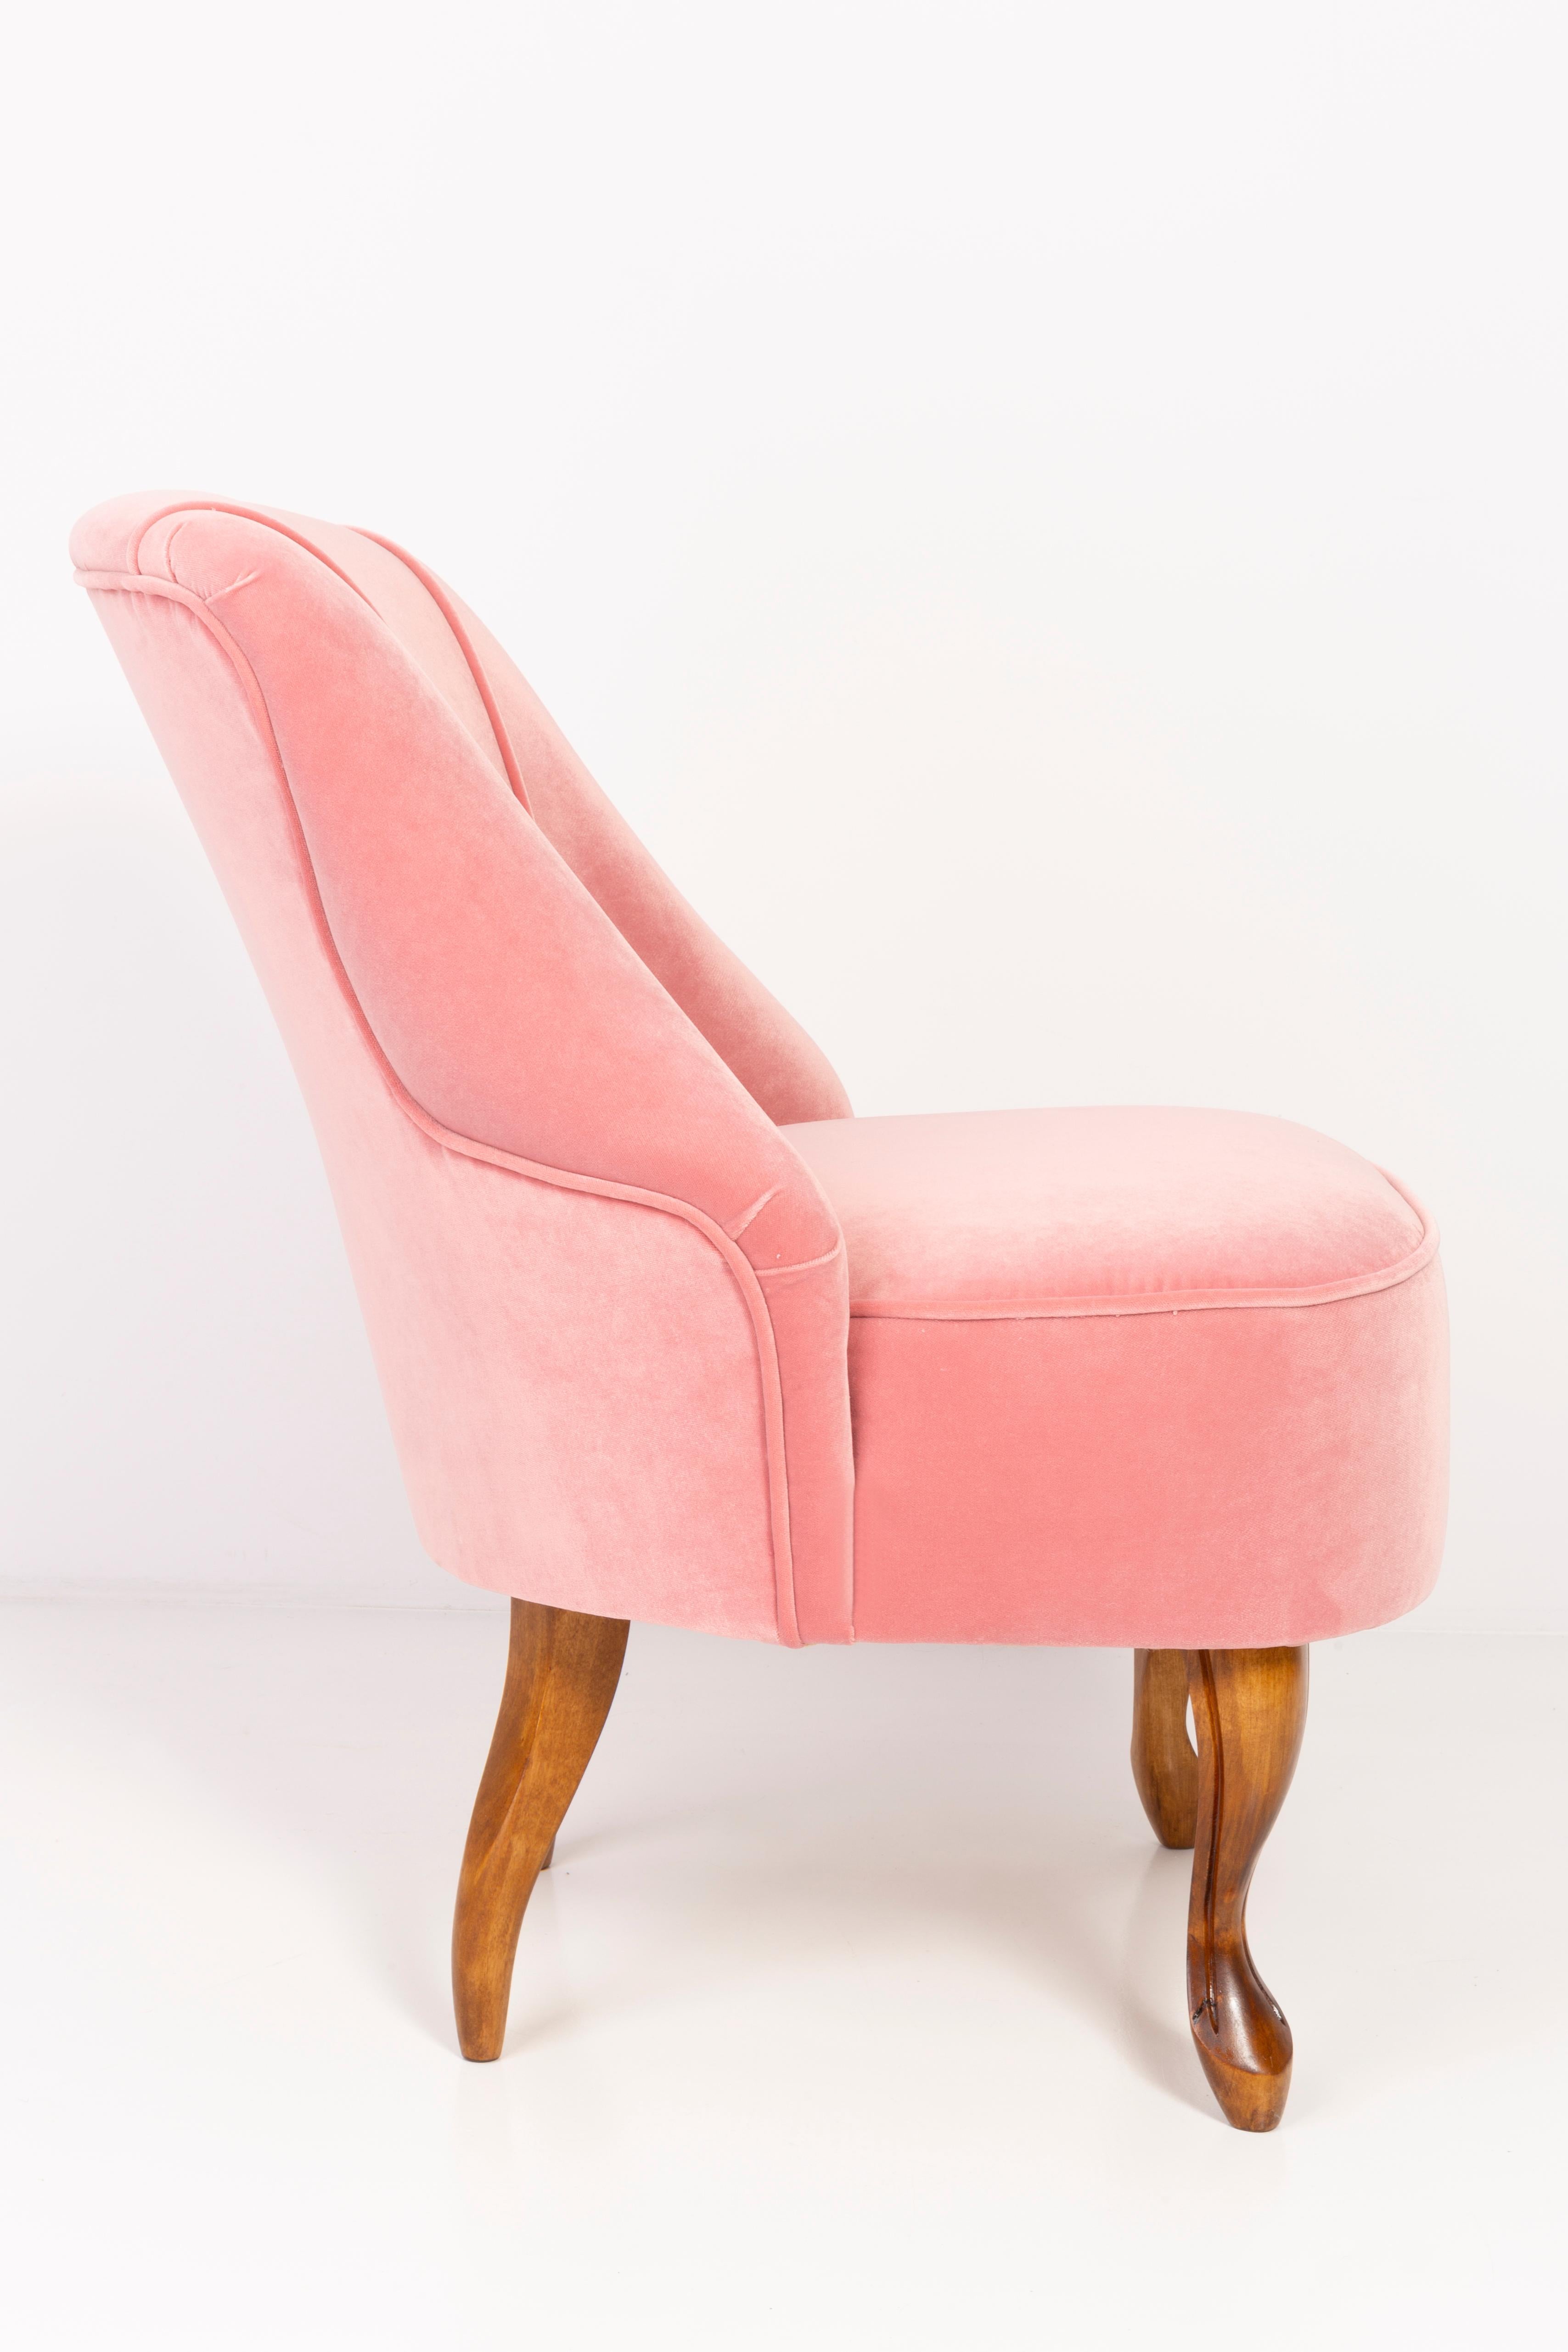 Set of Two 20th Century Art Deco Baby Pink Armchairs, 1950s In Excellent Condition For Sale In 05-080 Hornowek, PL